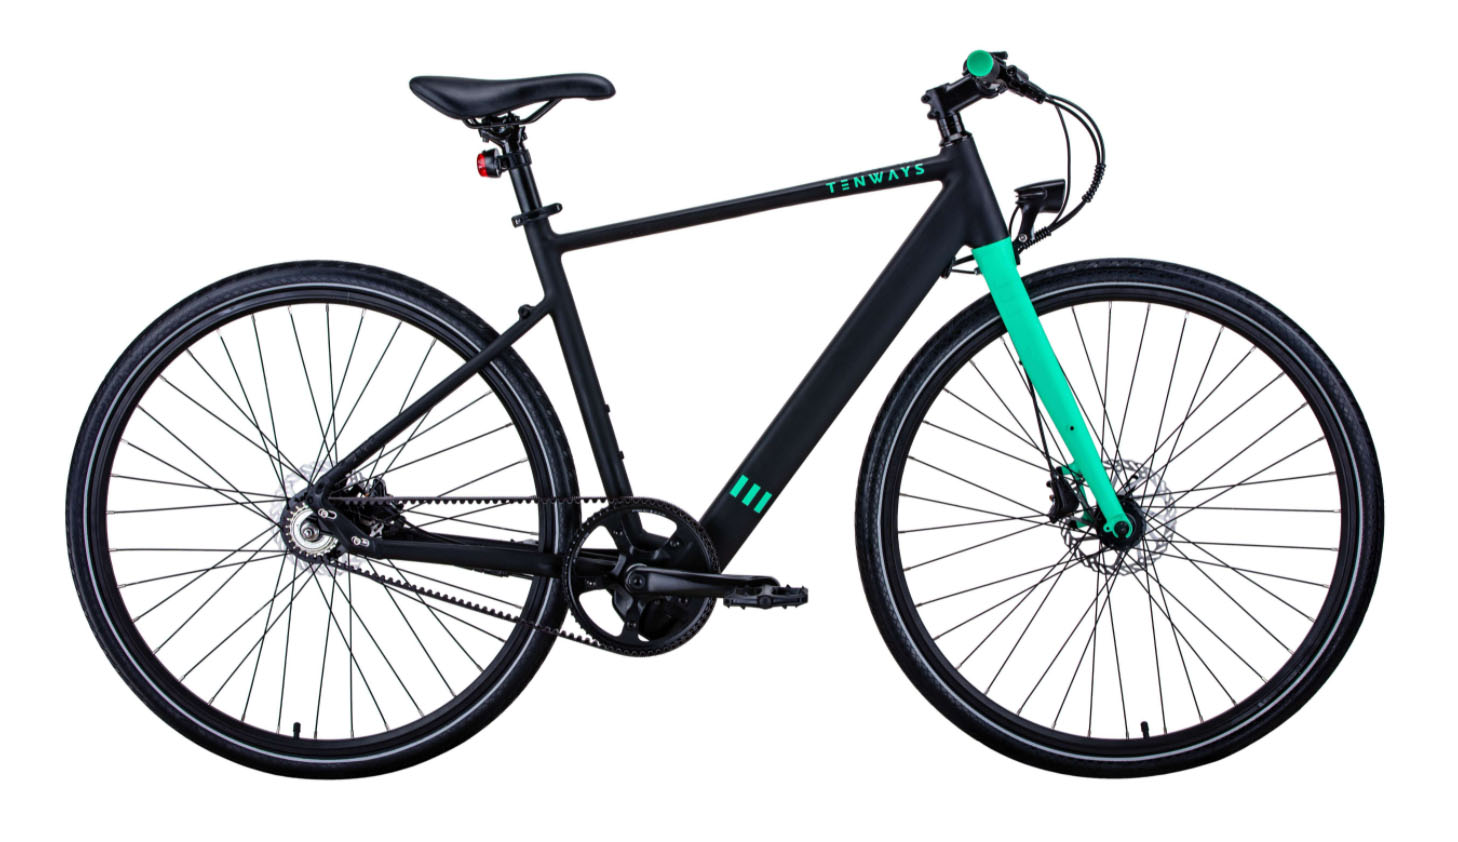 Review The Tenways ebike is a lightweight stealthy steal for under 